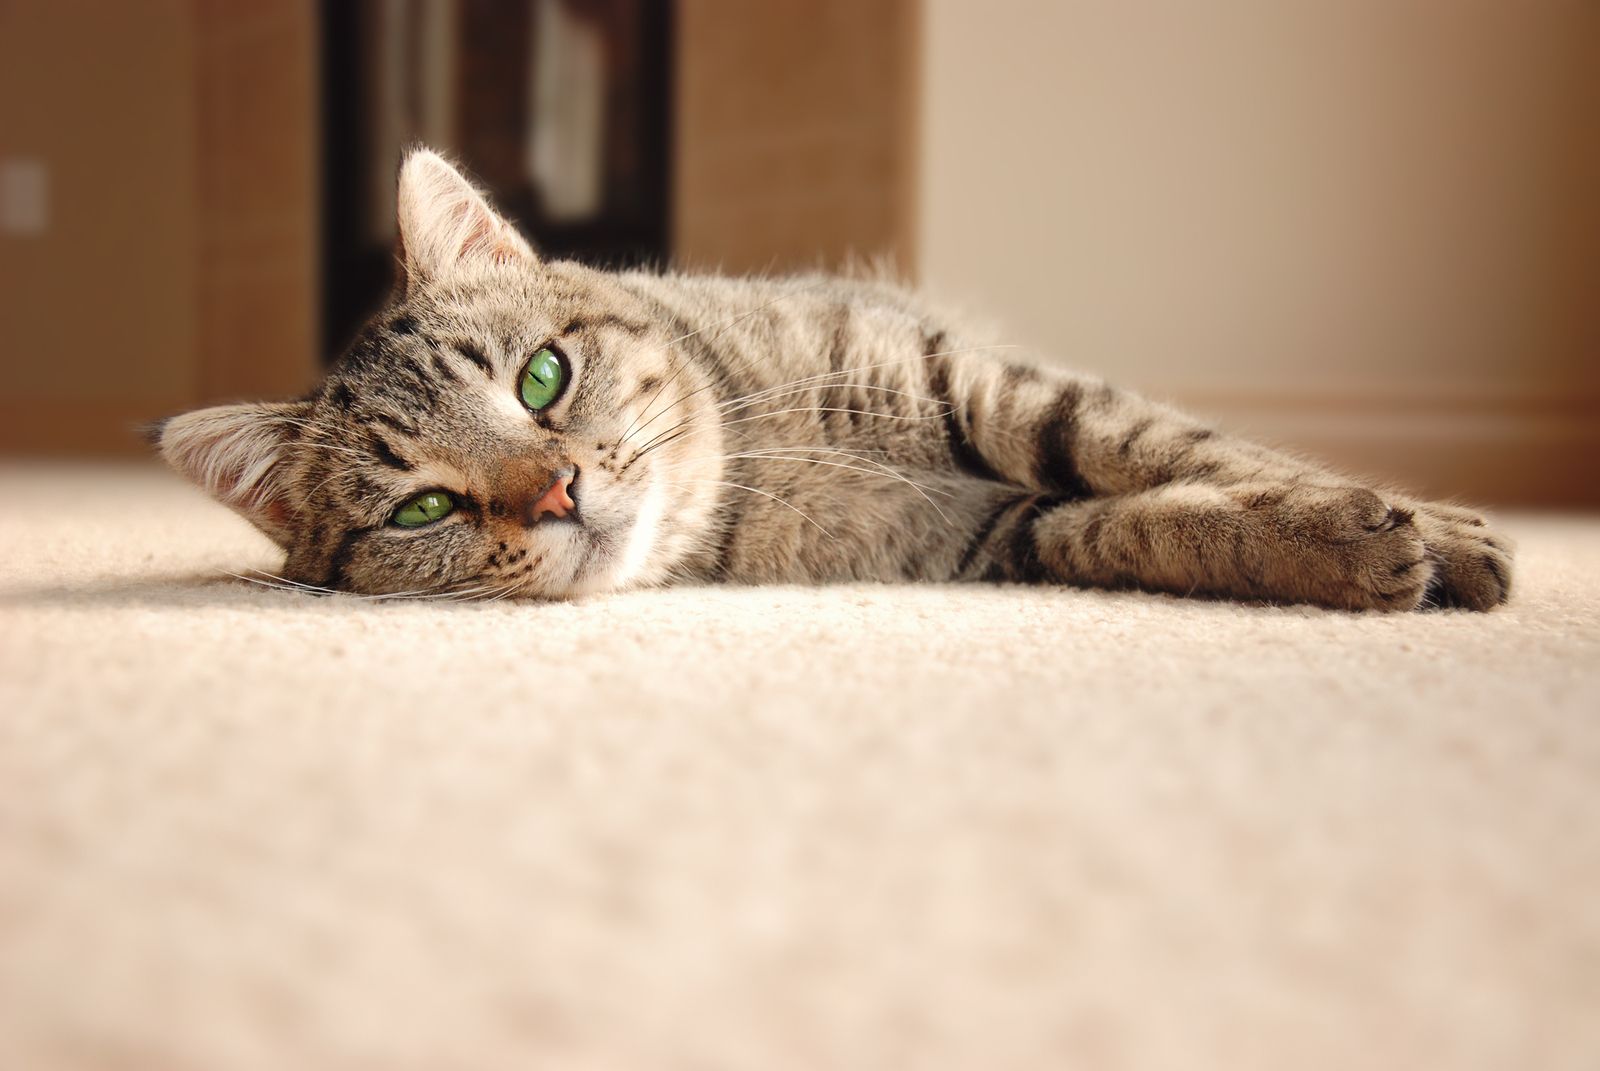 Treatment for Kidney Failure at Just Cats Veterinary Clinic